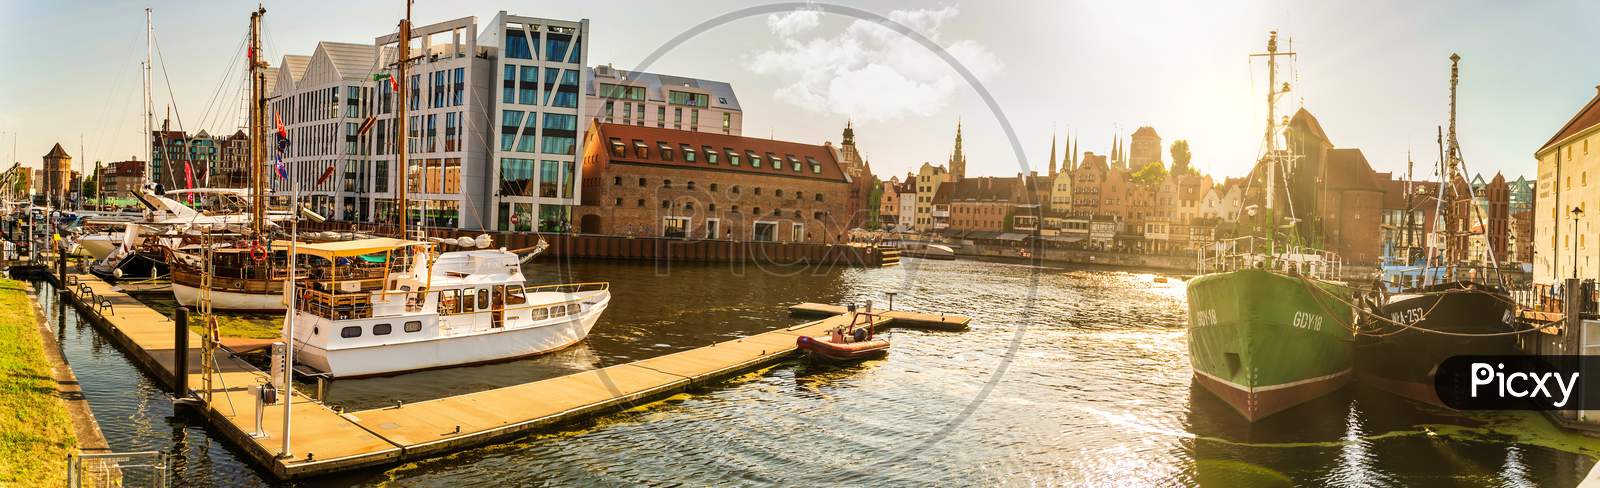 Gdansk, North Poland - August 13, 2020: Sunset Panoramic View Of Summer Around Motlawa River Adjacent To Beautiful Polish Architecture Near Baltic Sea And Boats Docked